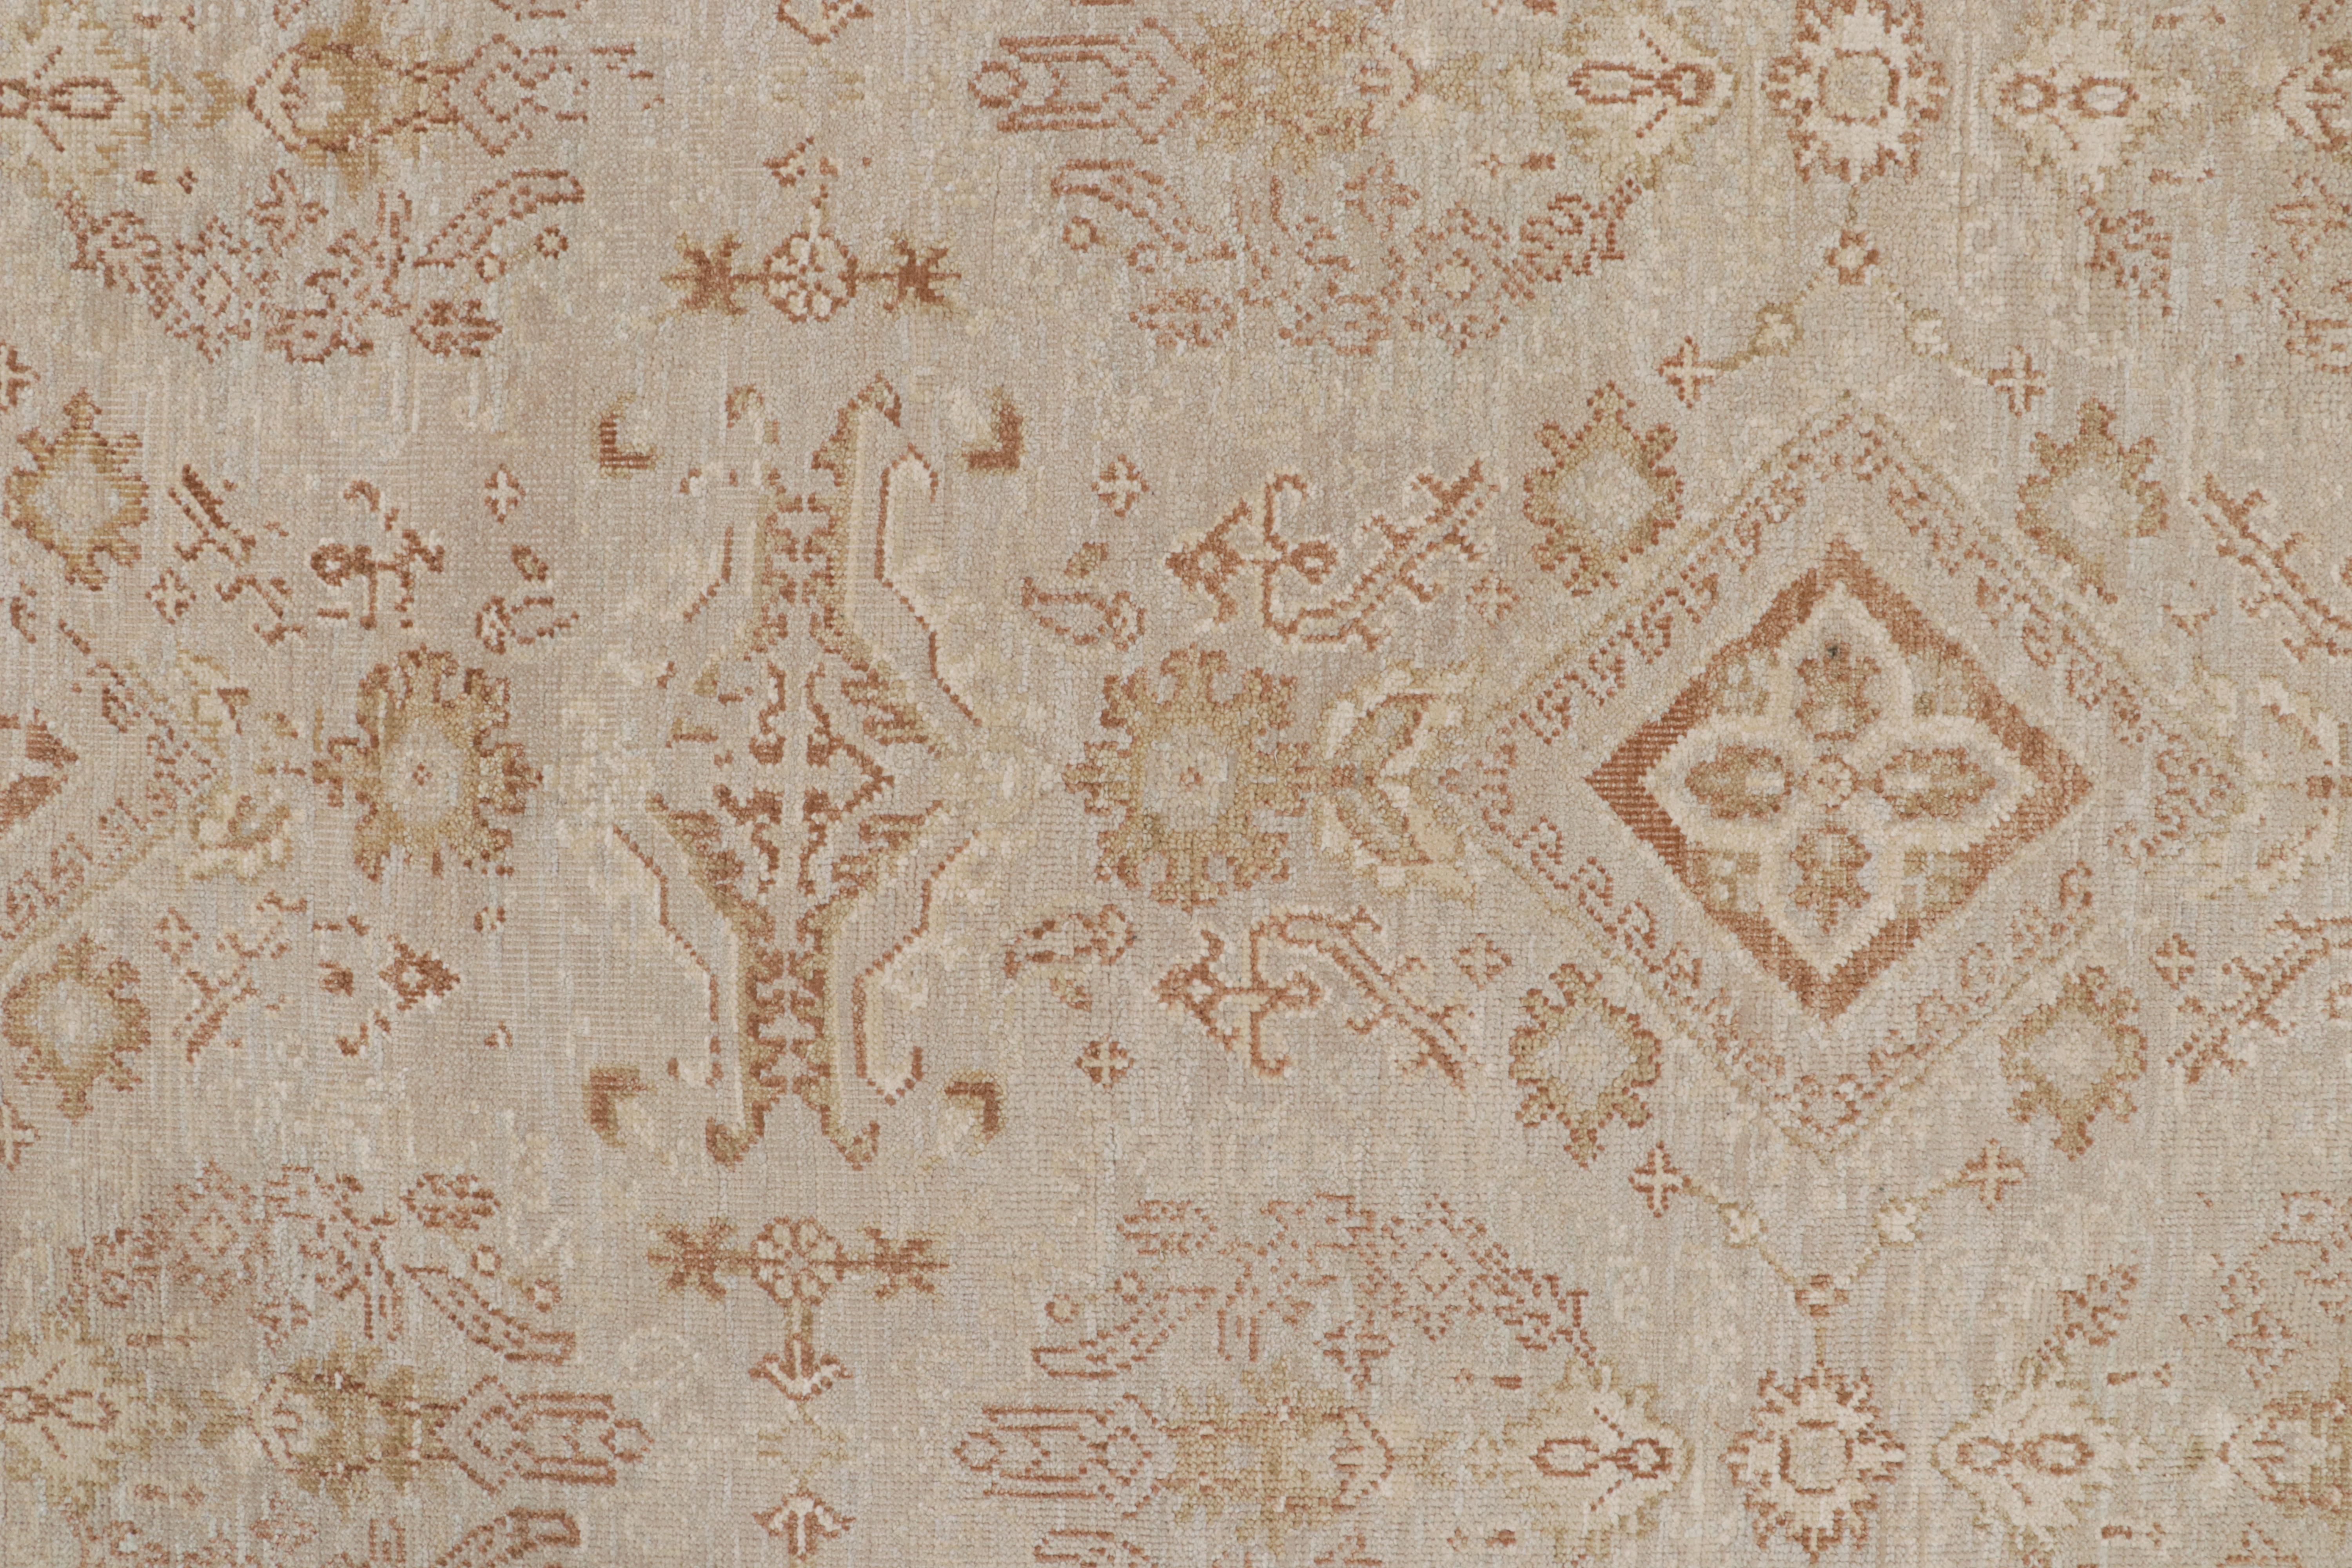 Contemporary Rug & Kilim’s Oushak Style Oversized Rug in Taupe with Rust Floral Patterns For Sale